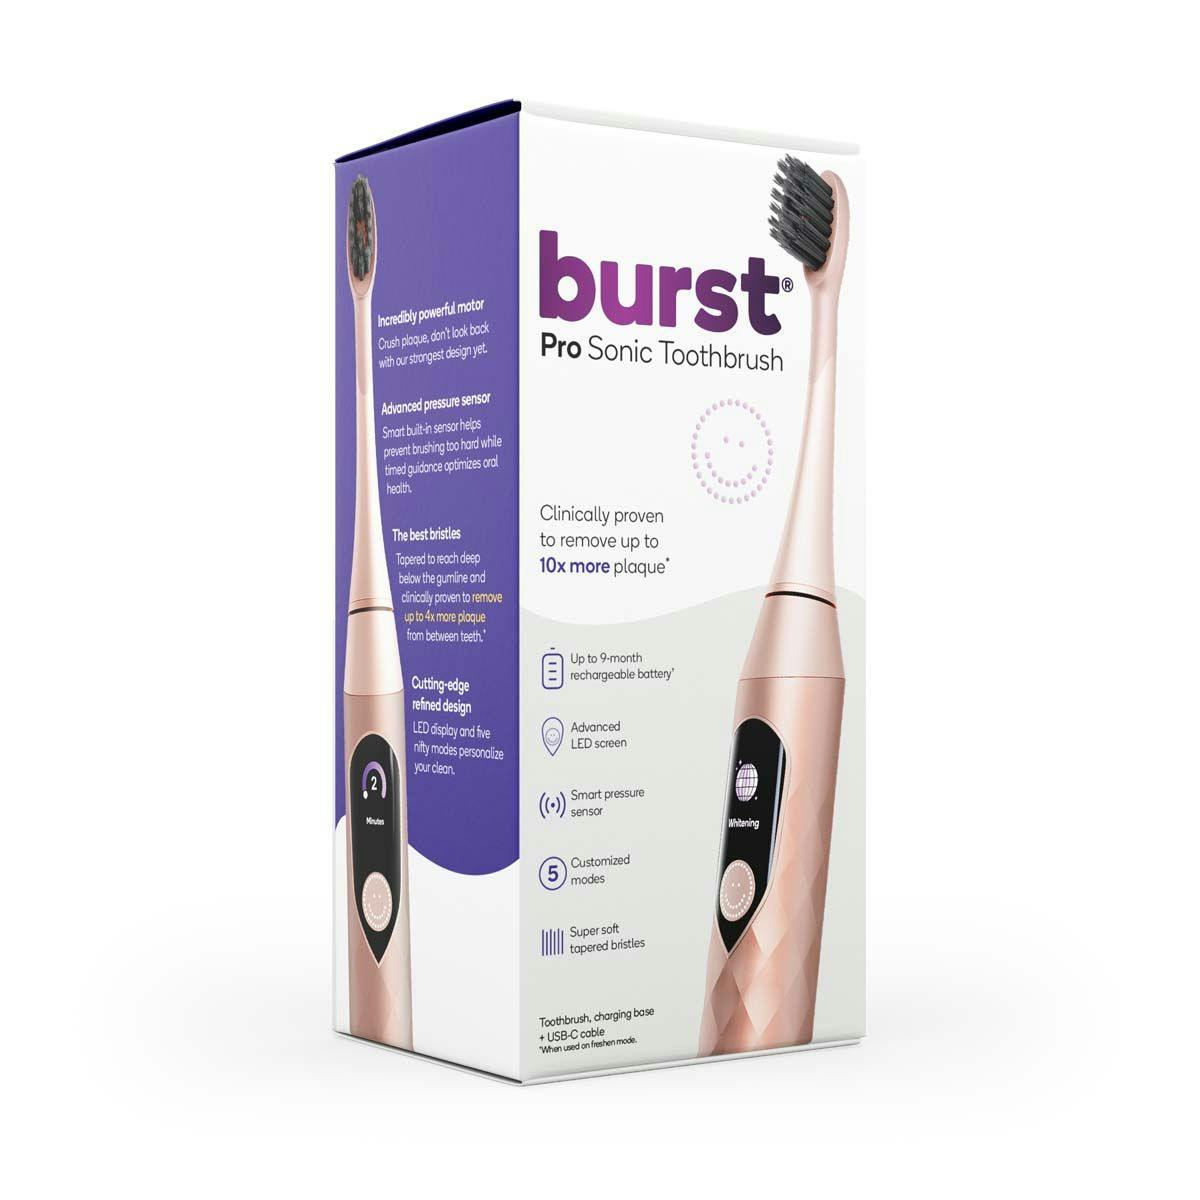 The Pro Sonic Toothbrush from BURST Oral Care | Image Credit: © BURST Oral Care 